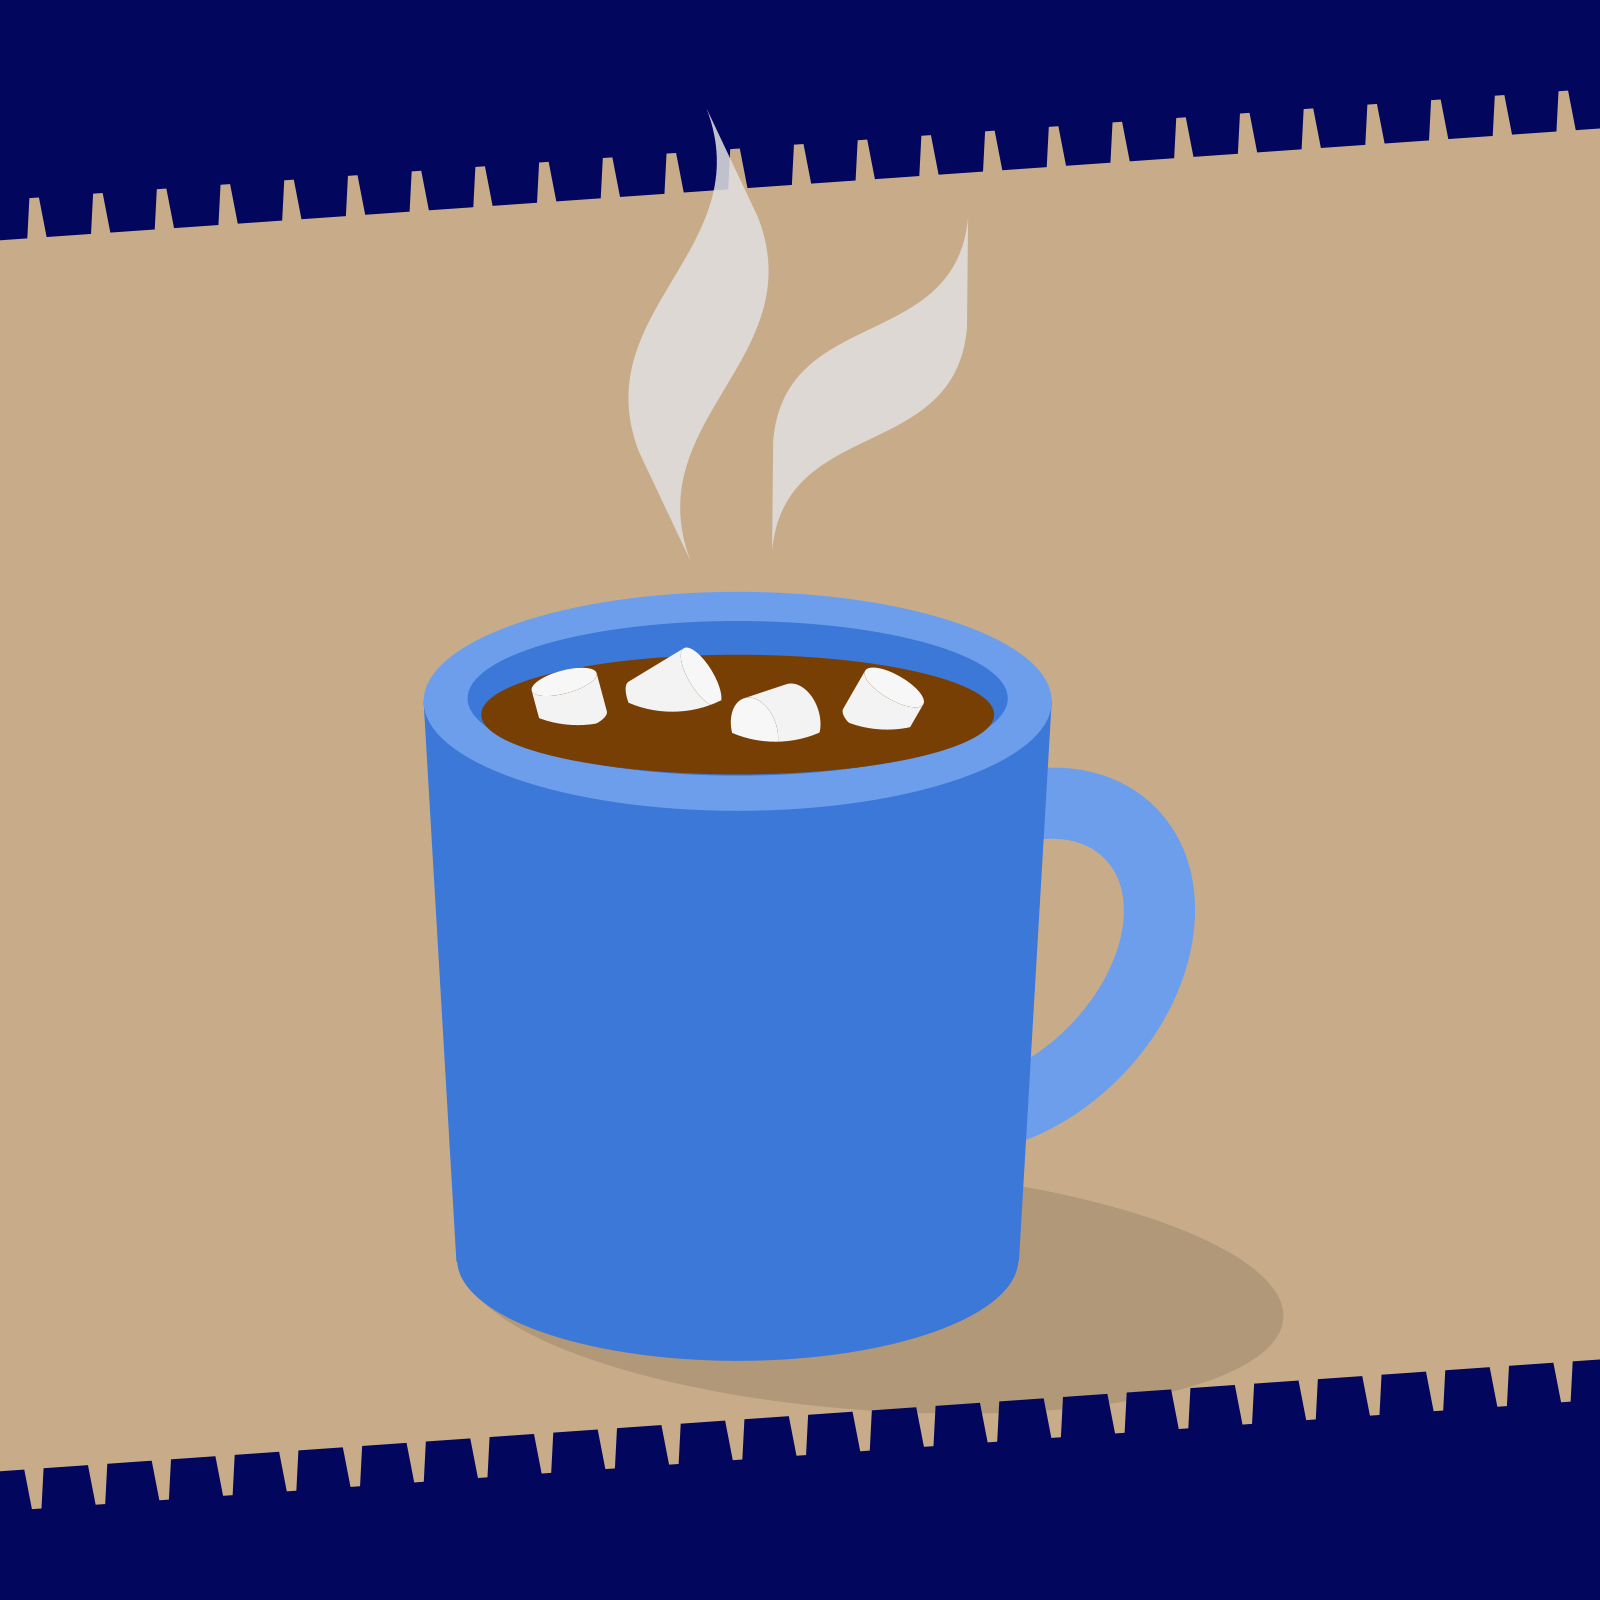 Drawing of a mug filled with hot chocolate with marshmallows floating on top